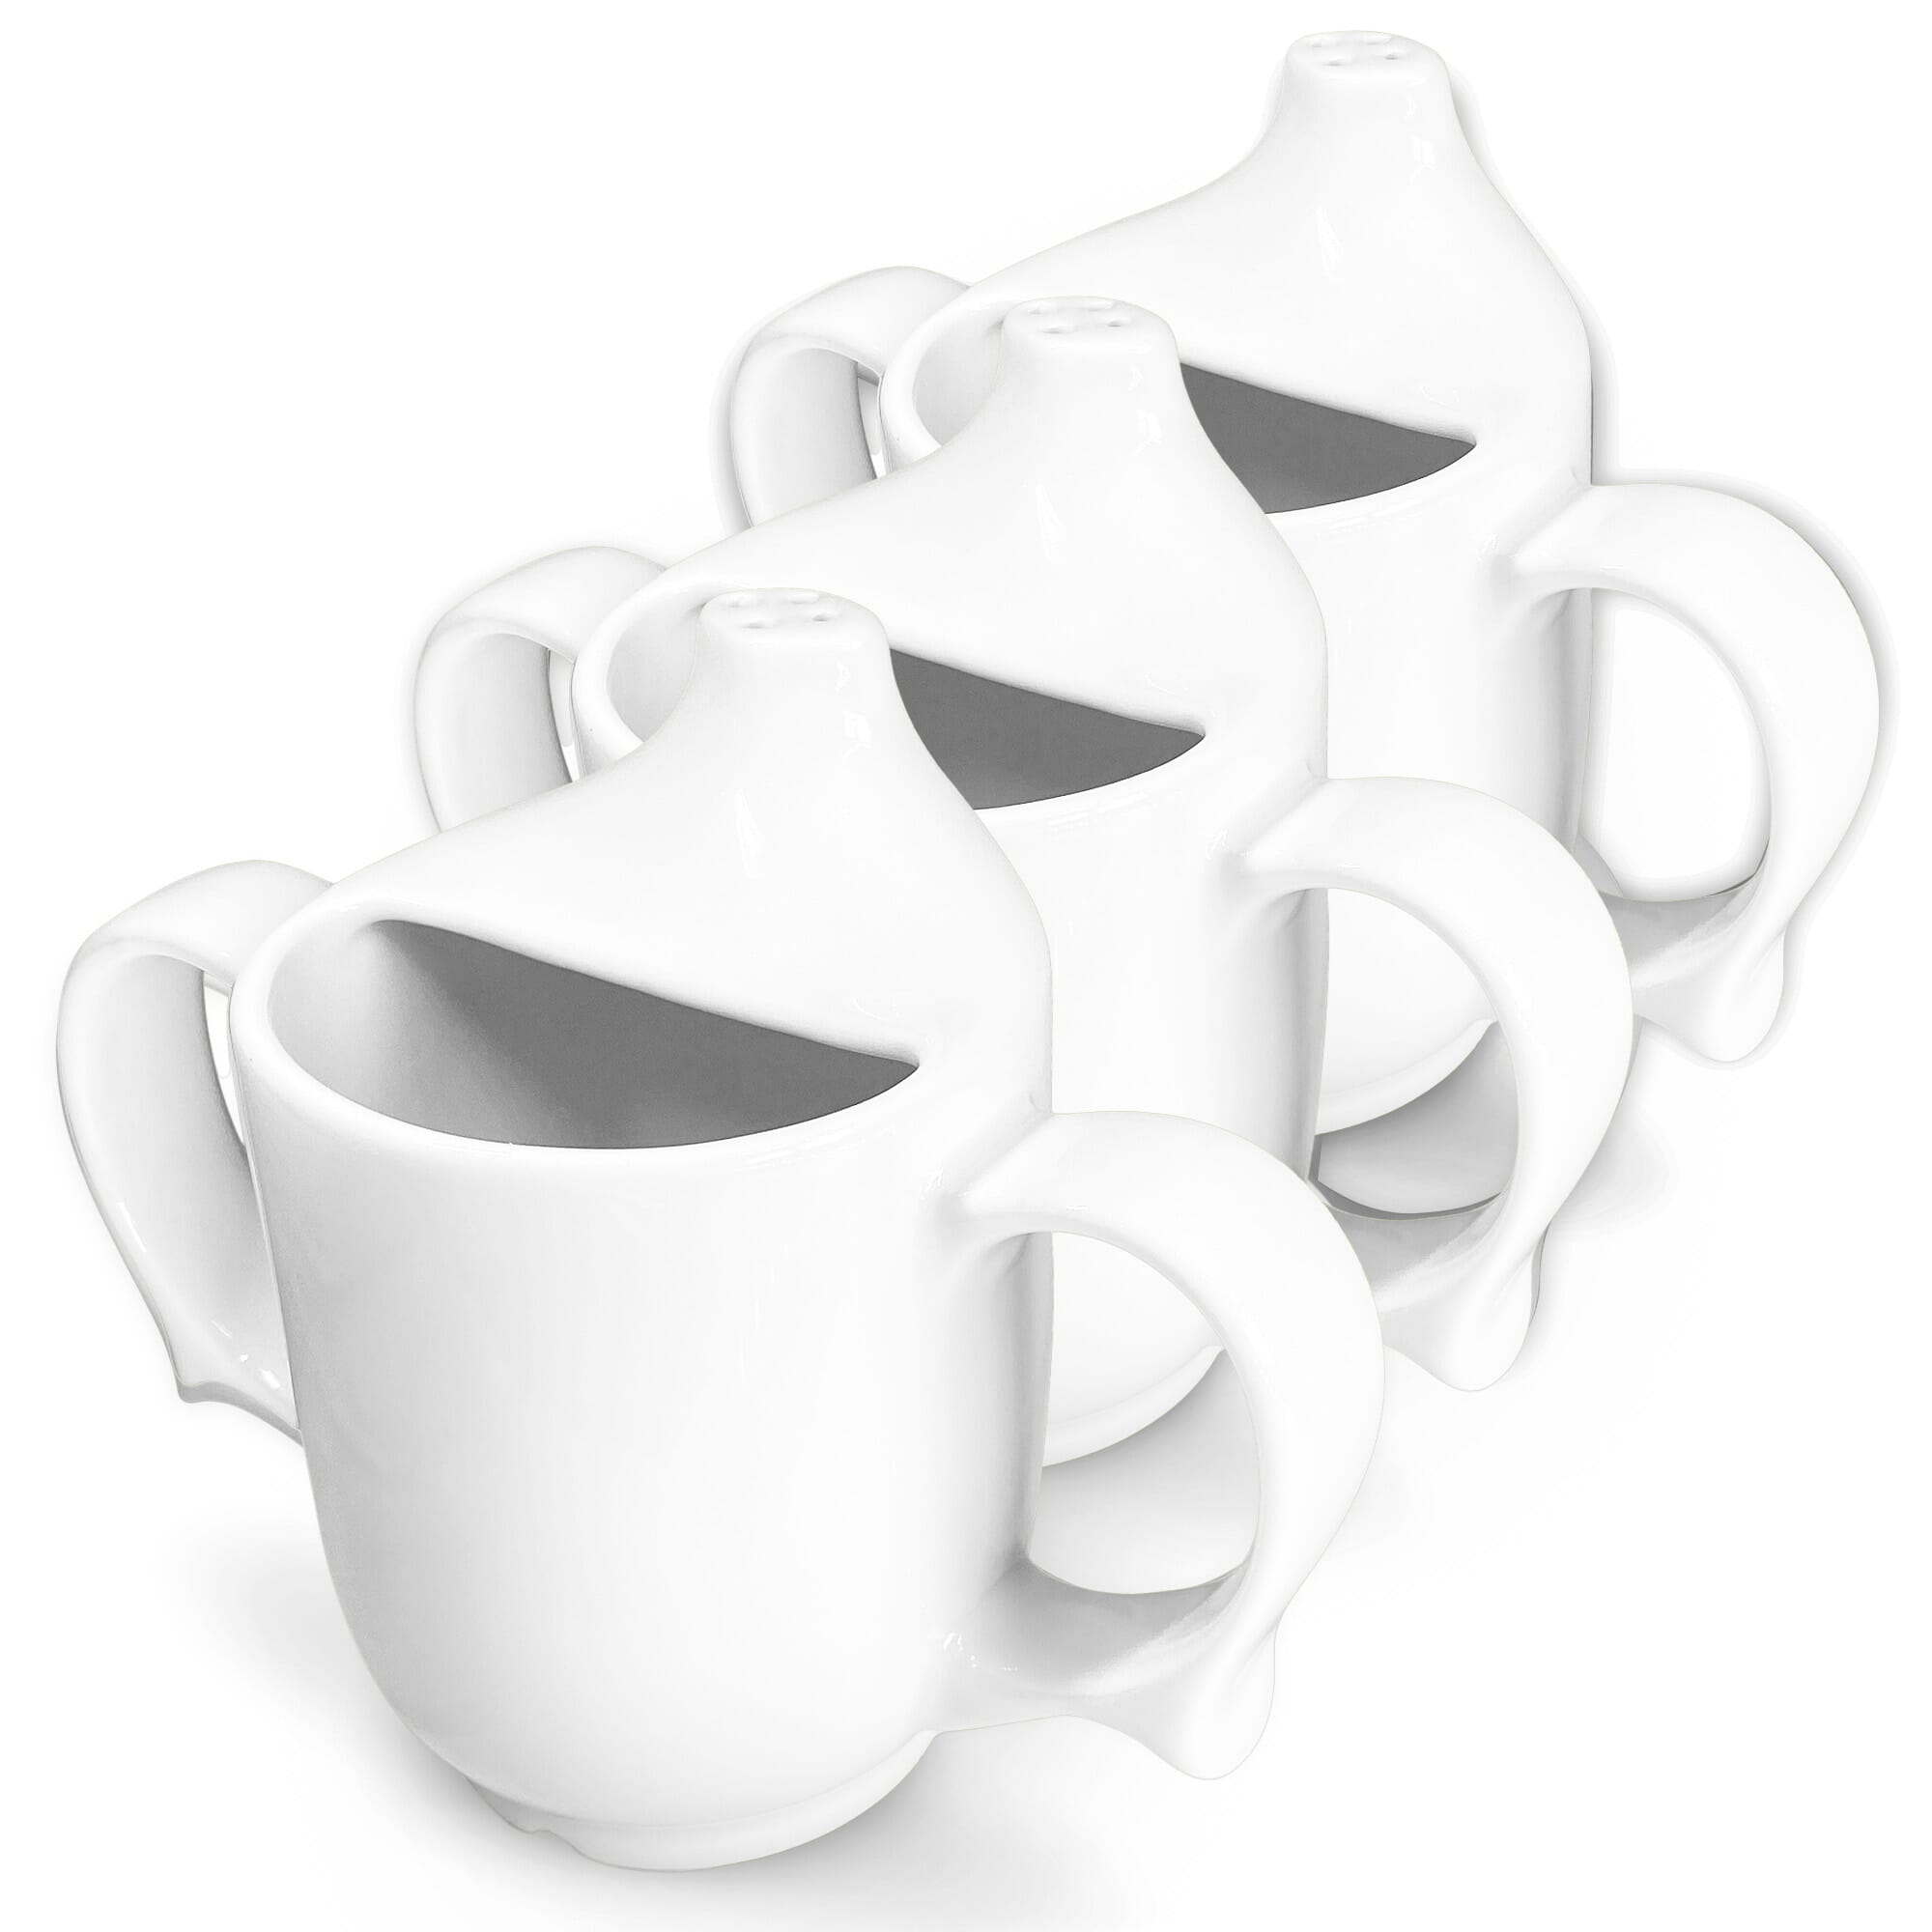 View Dignity Two Handled Drinking Cup White Pack of 3 information